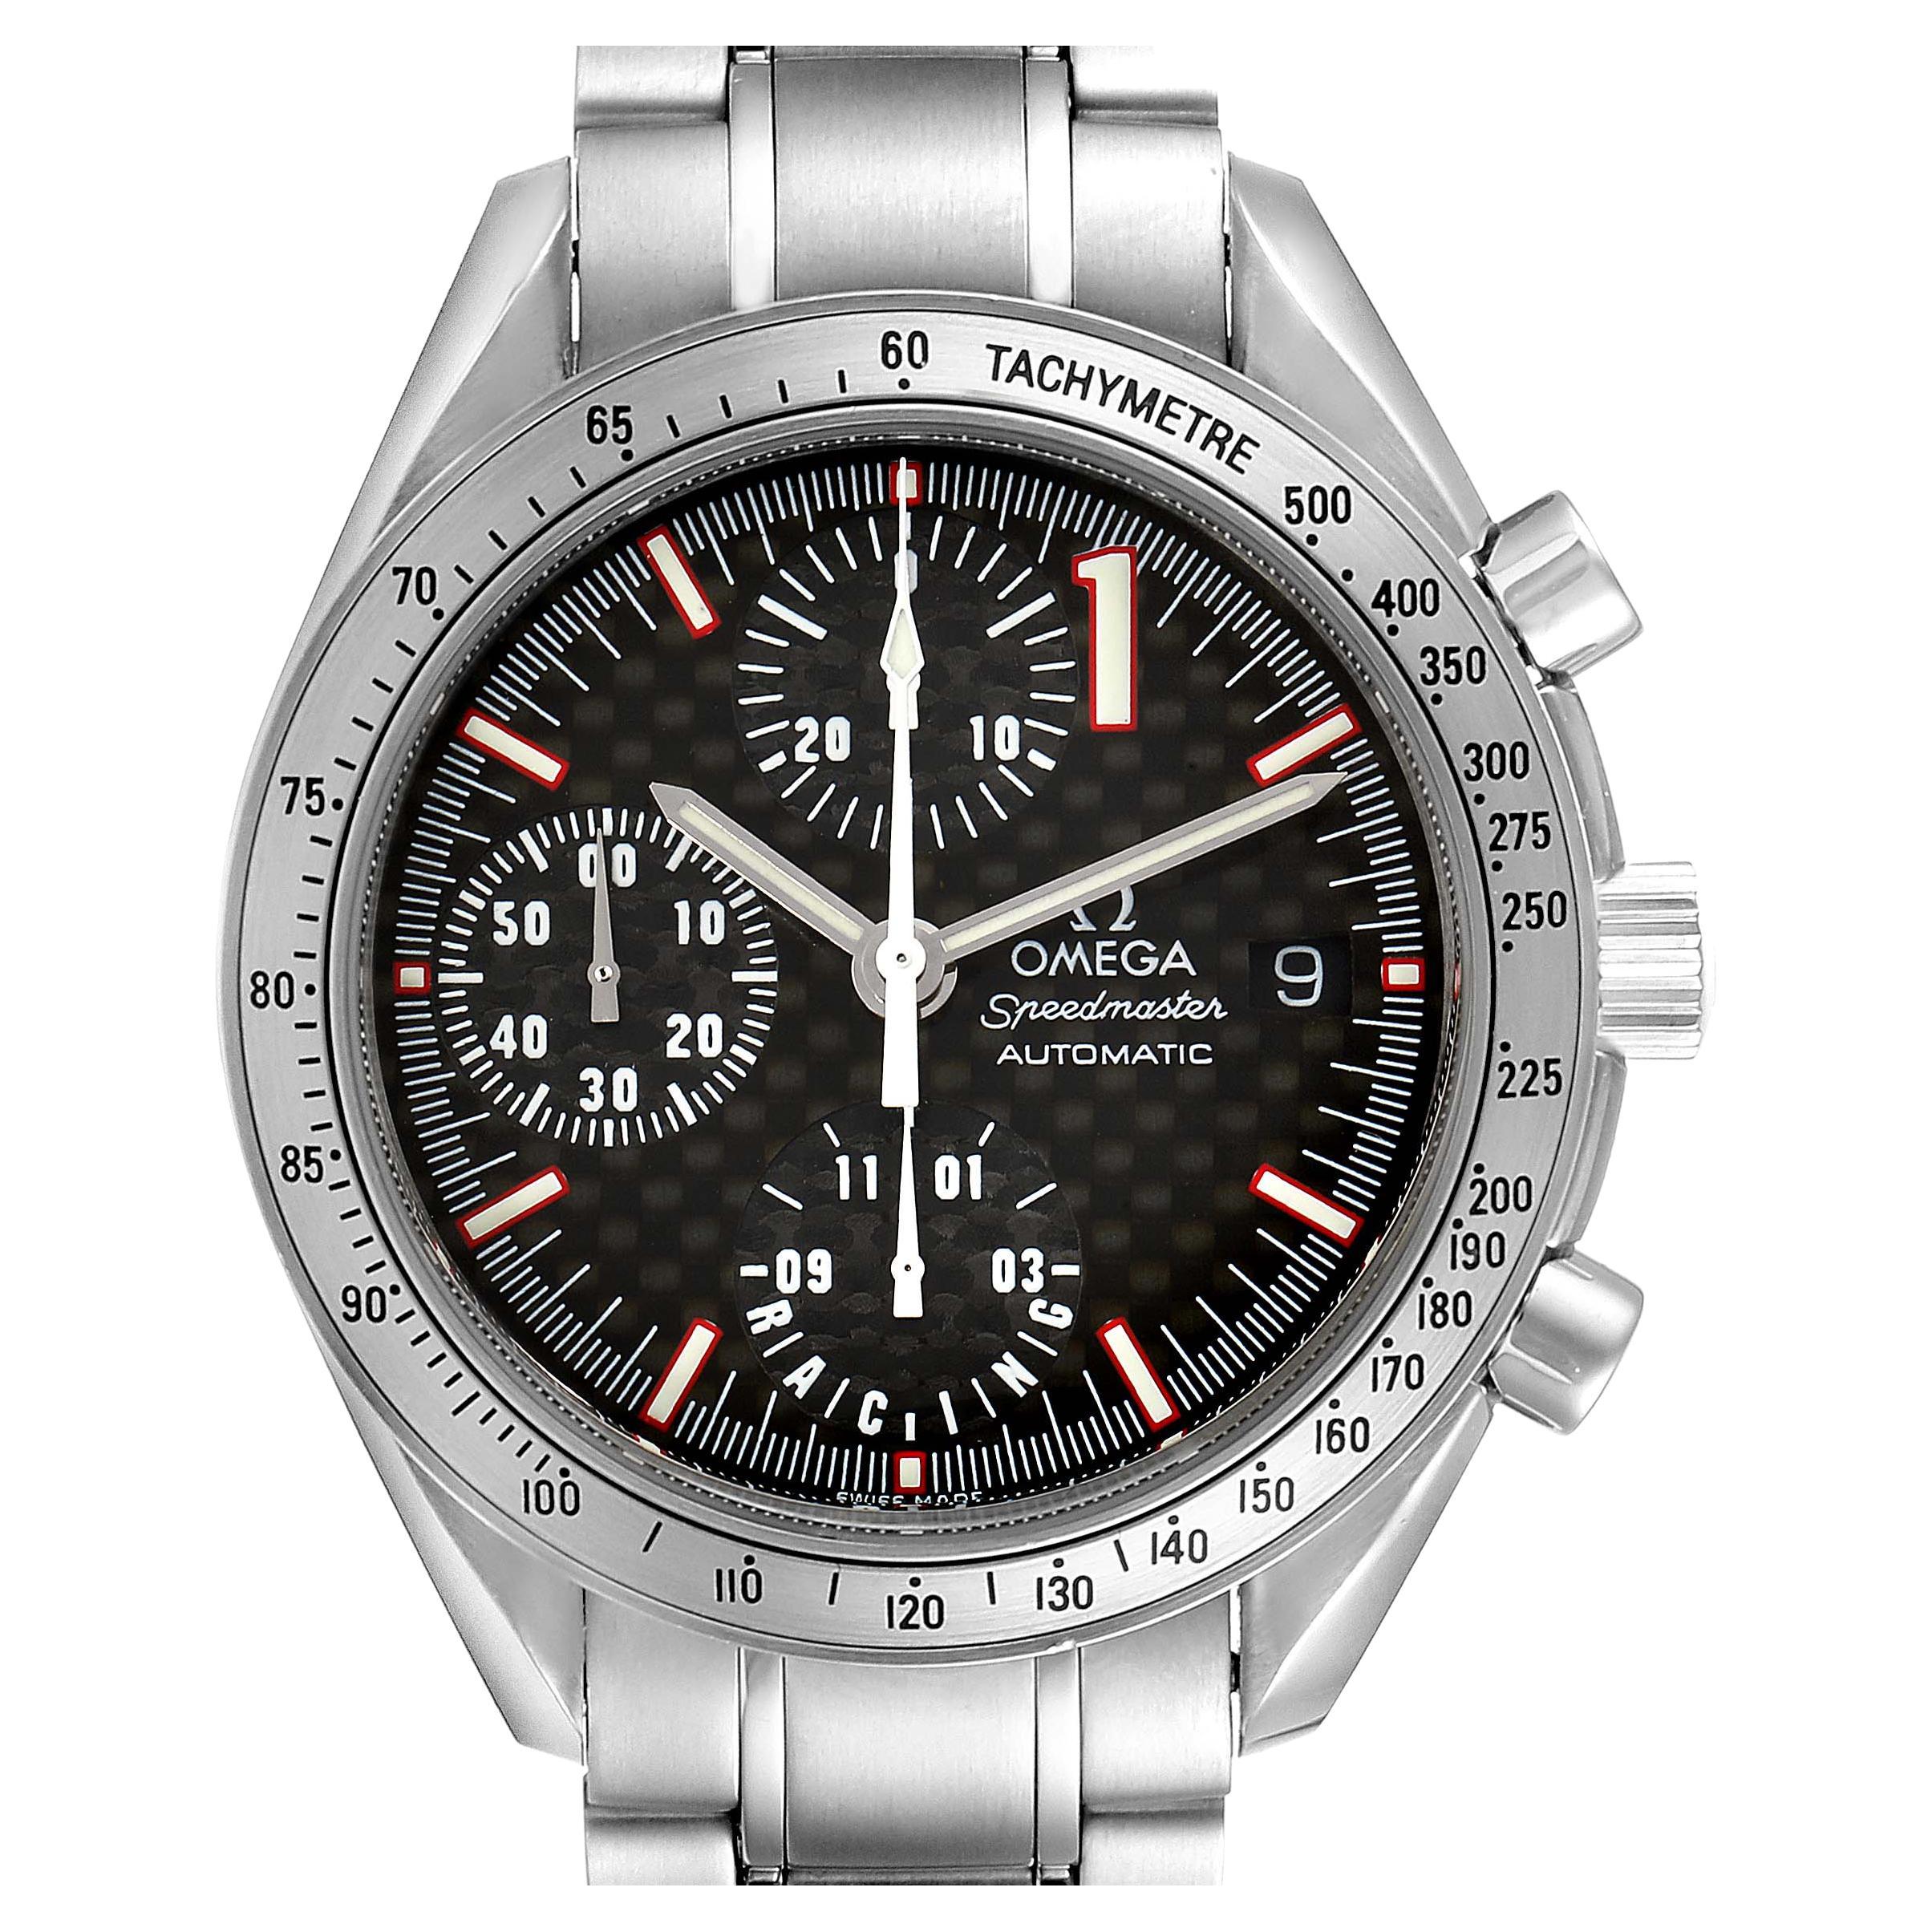 Omega Speedmaster Schumacher Racing Limited Edition Watch 3519.50.00 For Sale